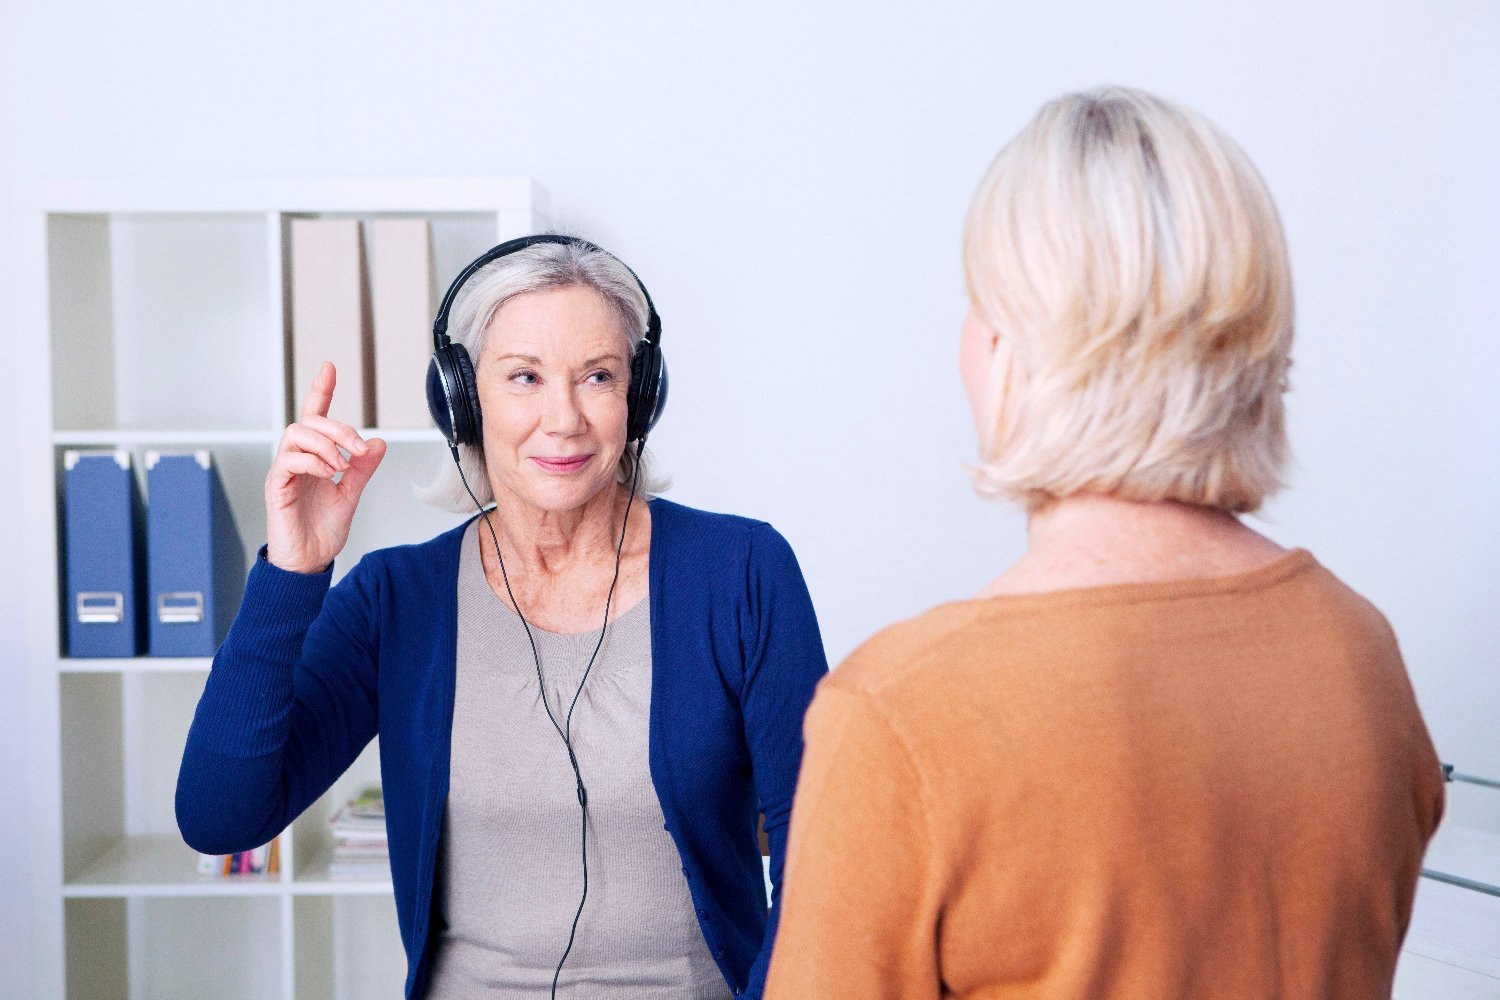 Decoding Audiograms: The Science Behind Hearing Assessments